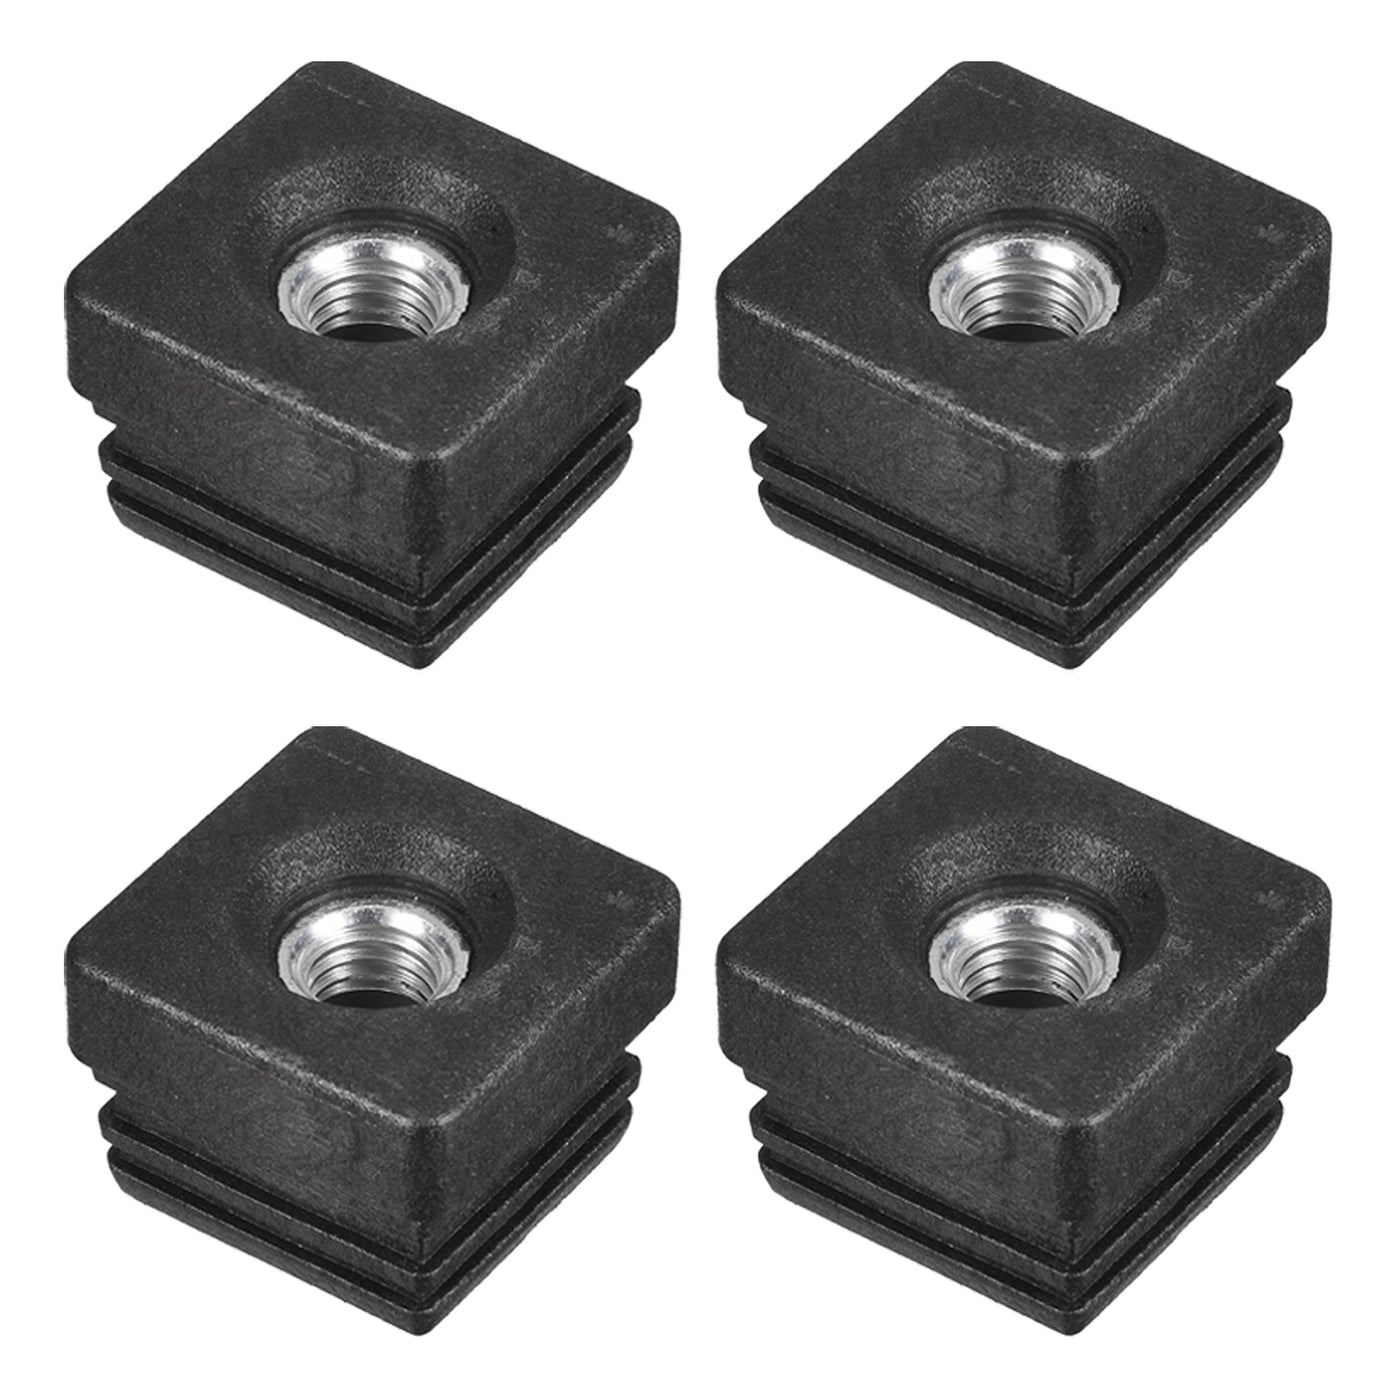 uxcell Uxcell 4Pcs 1.26"x1.26" Caster Insert with Thread, Square M10 Thread for Furniture